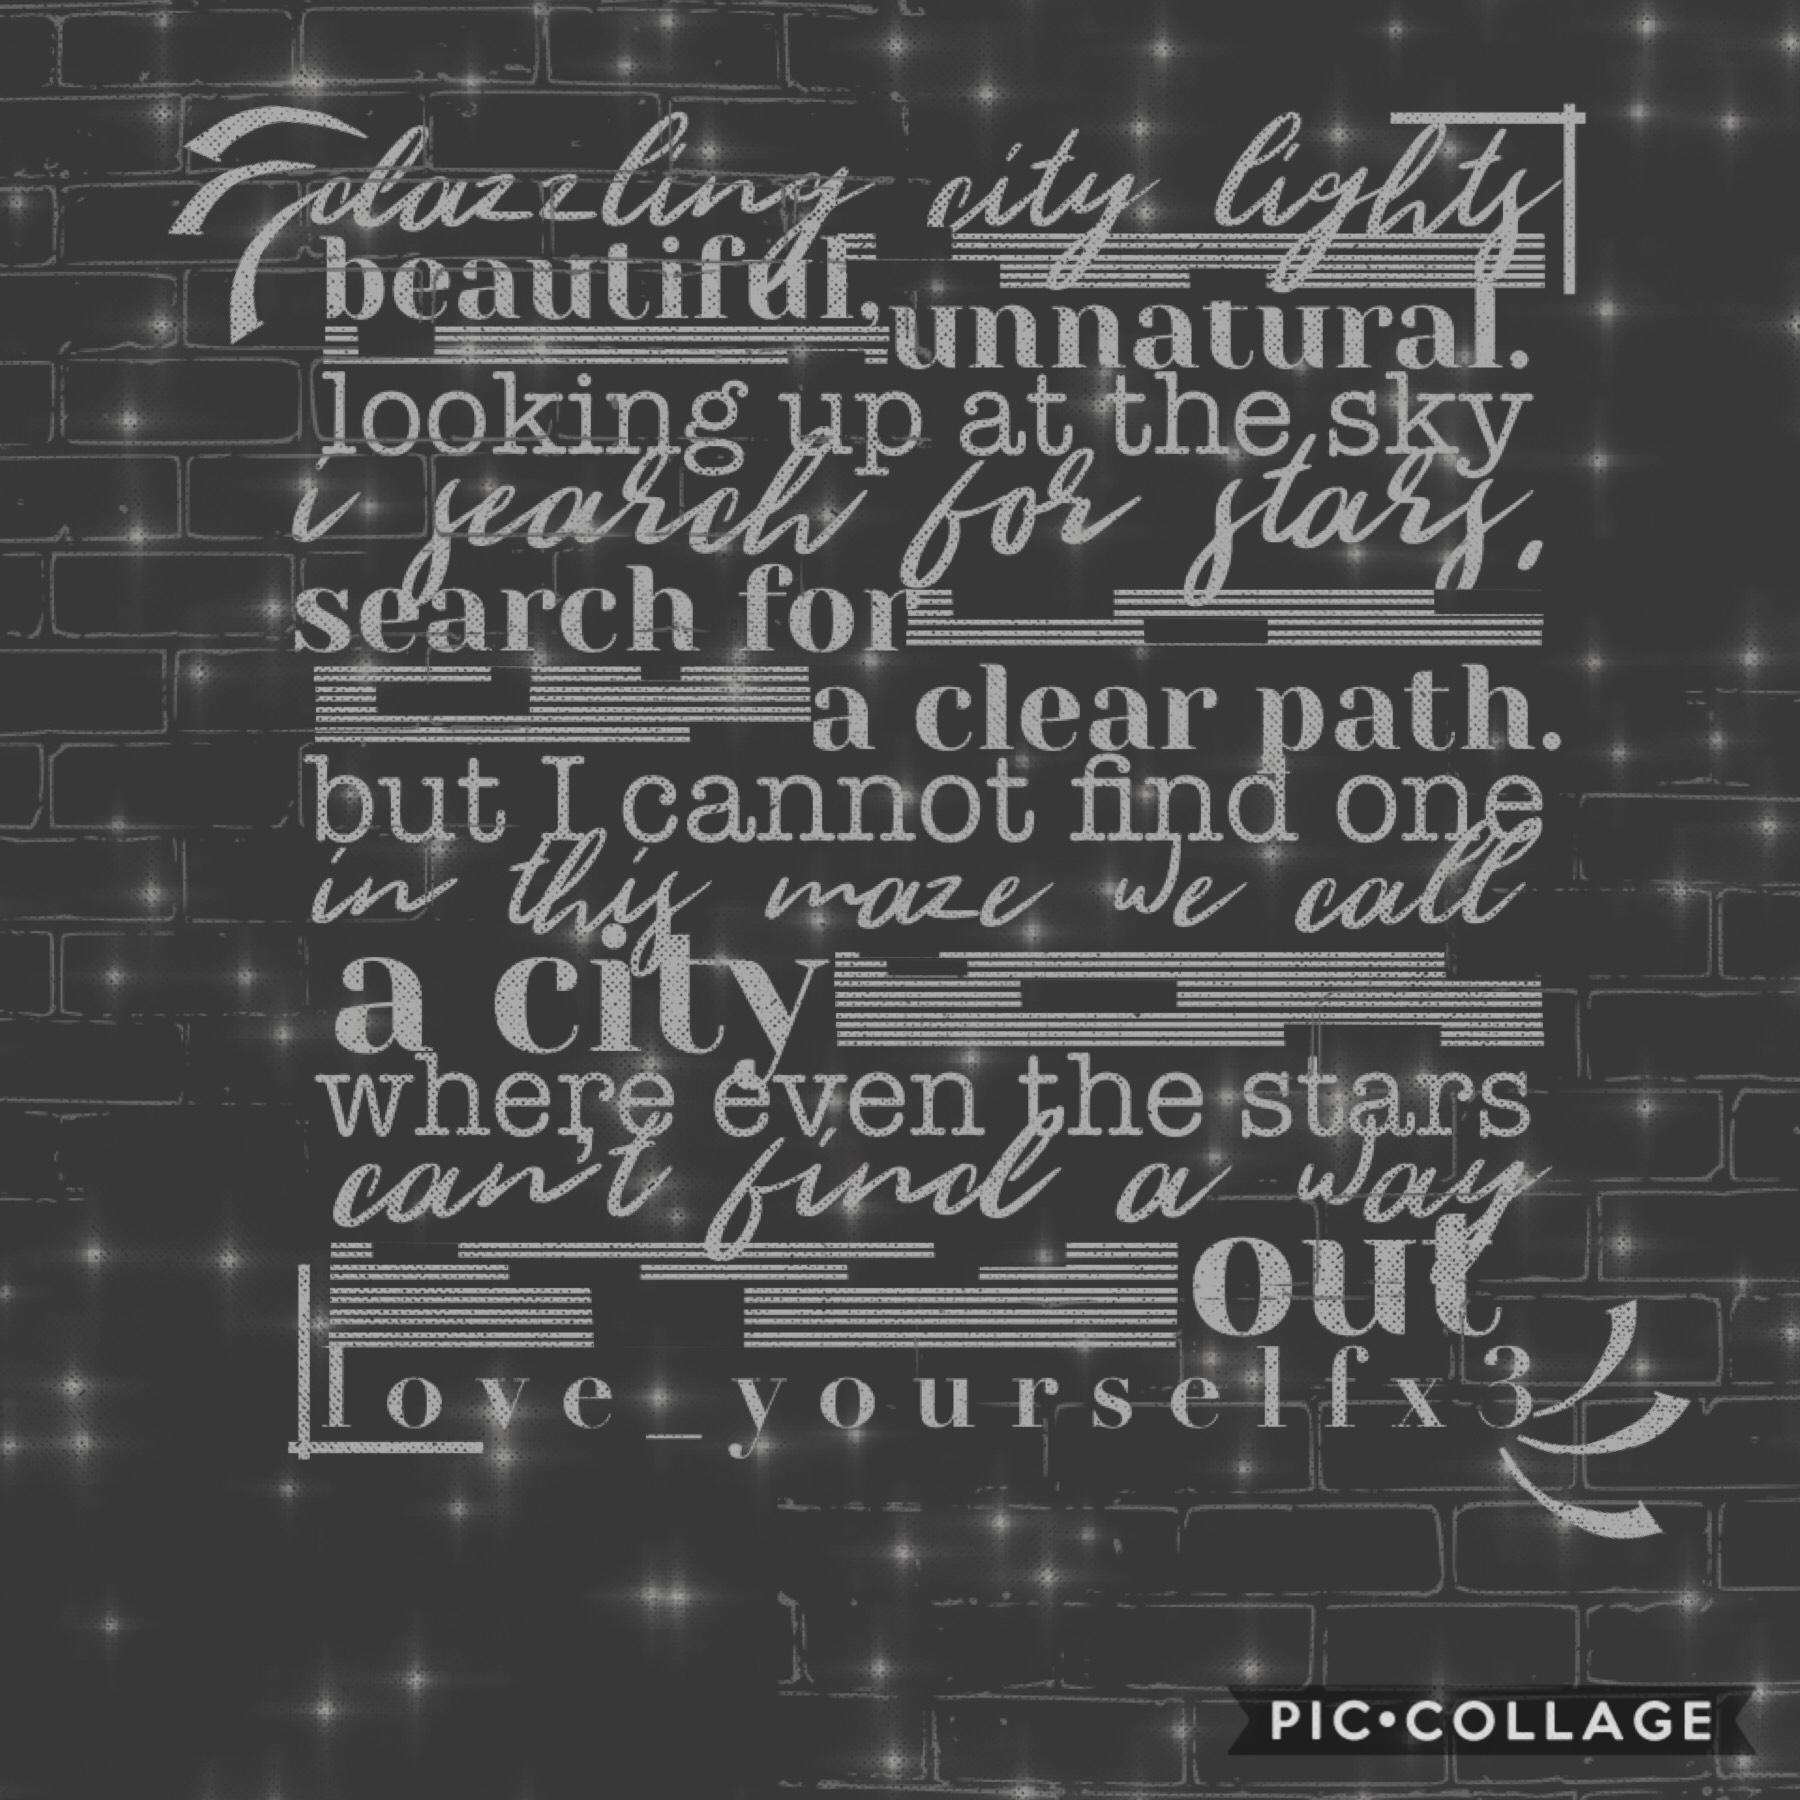 Hey guys!! This was totally inspired by raven :))) (Tap!)

So this was inspired by TheCrazyRavenclaw! (Hers are so much more aesthetic and easy to read though 😩) and this text is part of the poem I entered for GemQuote’s writing contest :D y’all should de